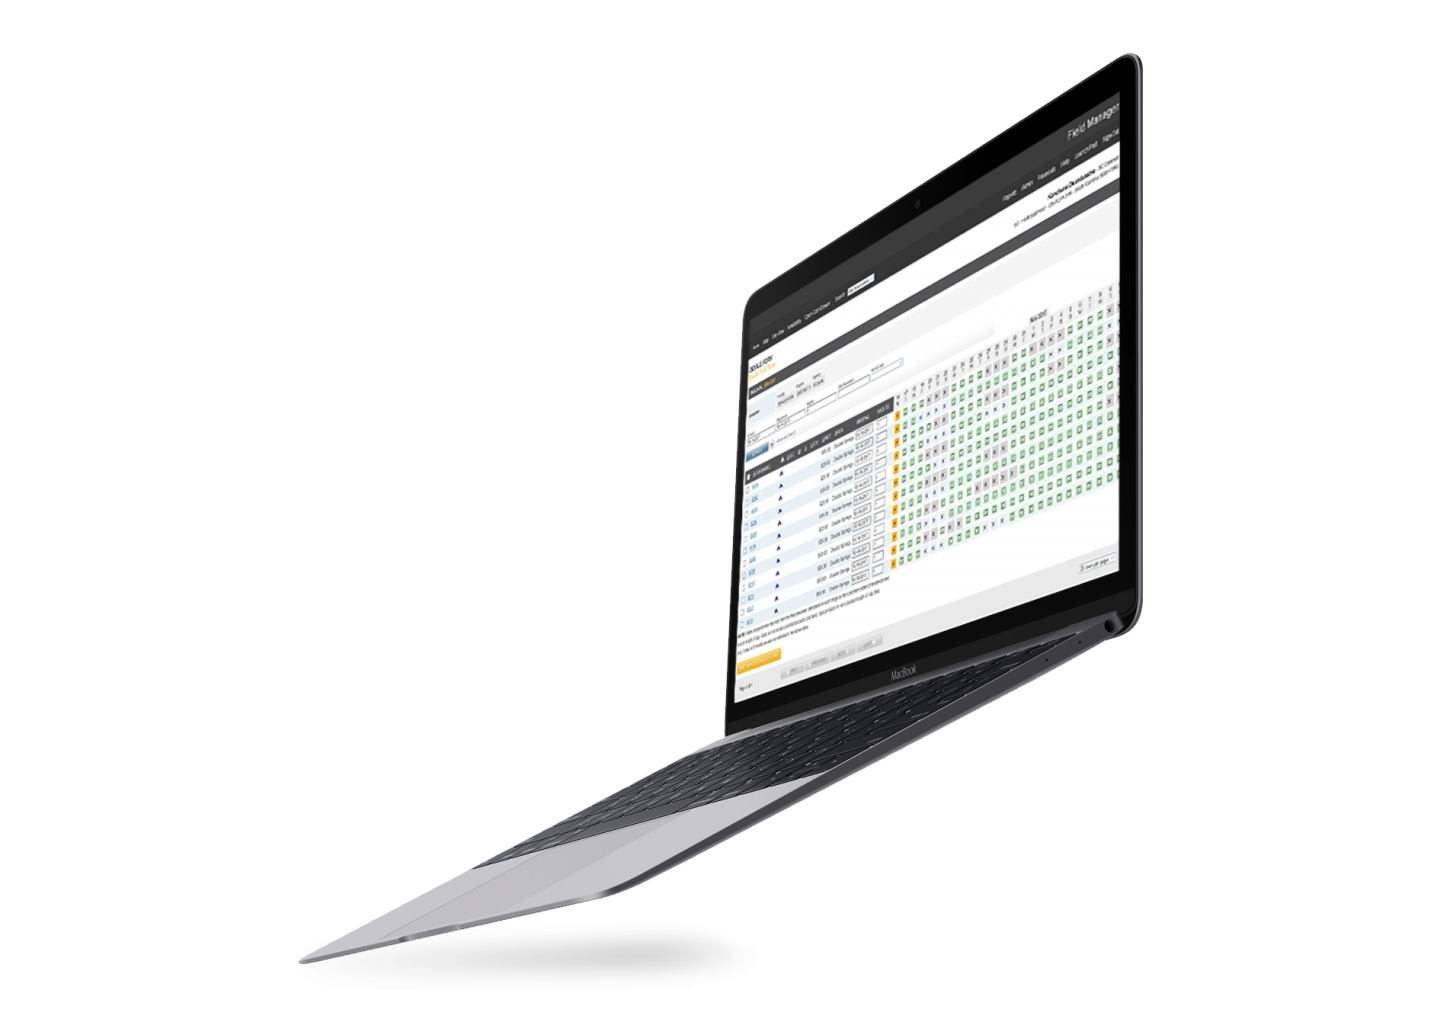 Software demonstration on a macbook